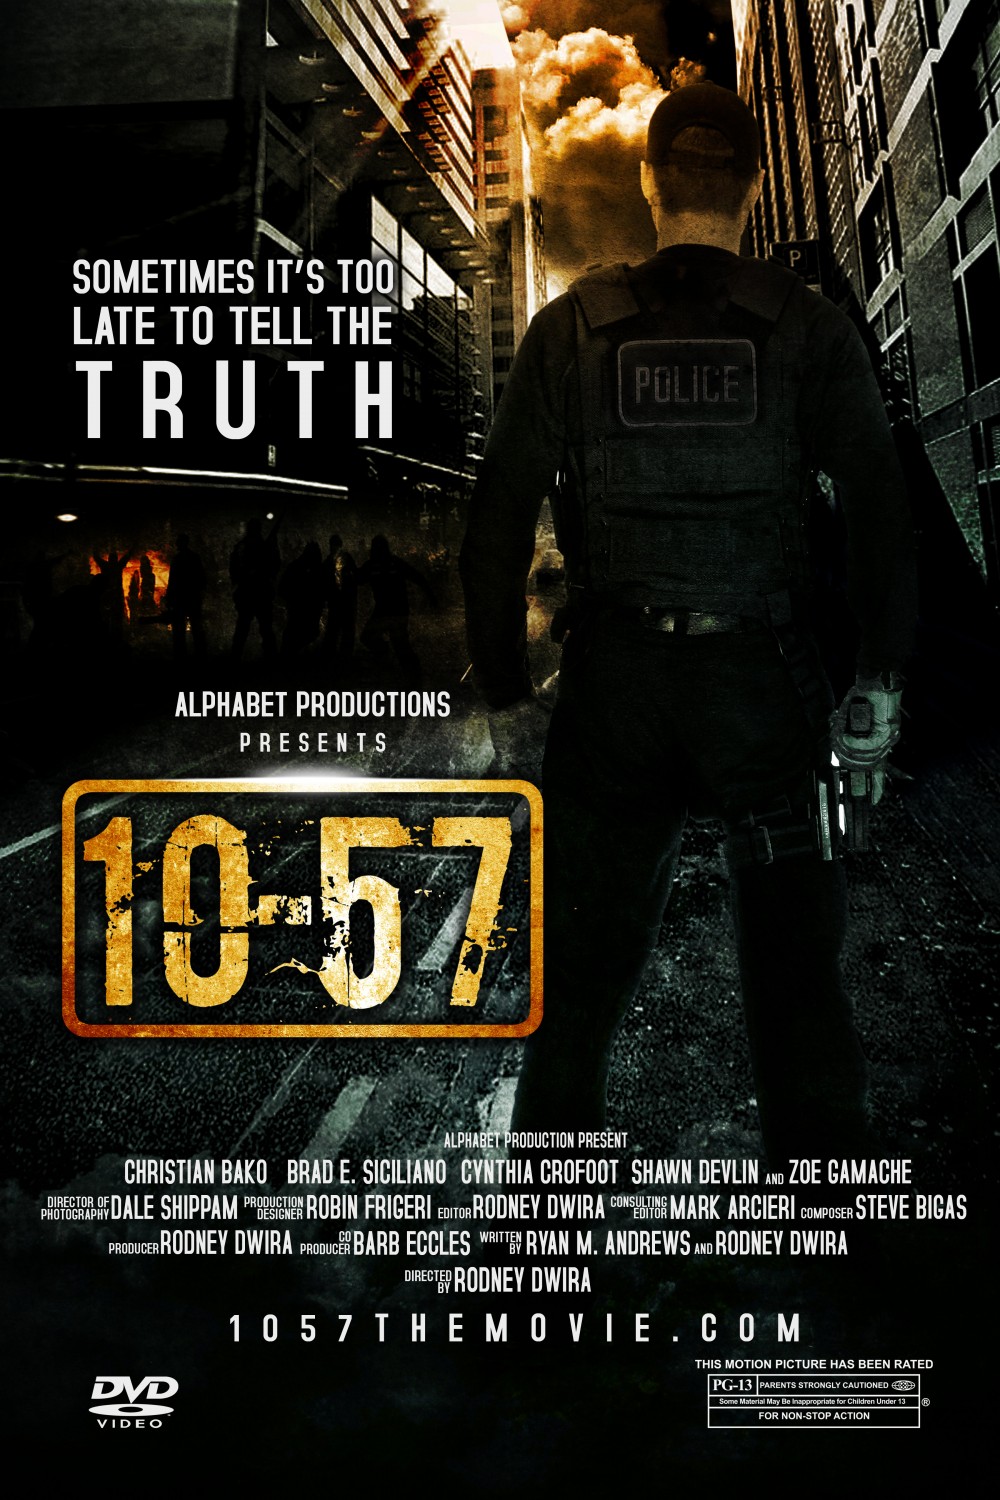 Extra Large Movie Poster Image for 10-57 